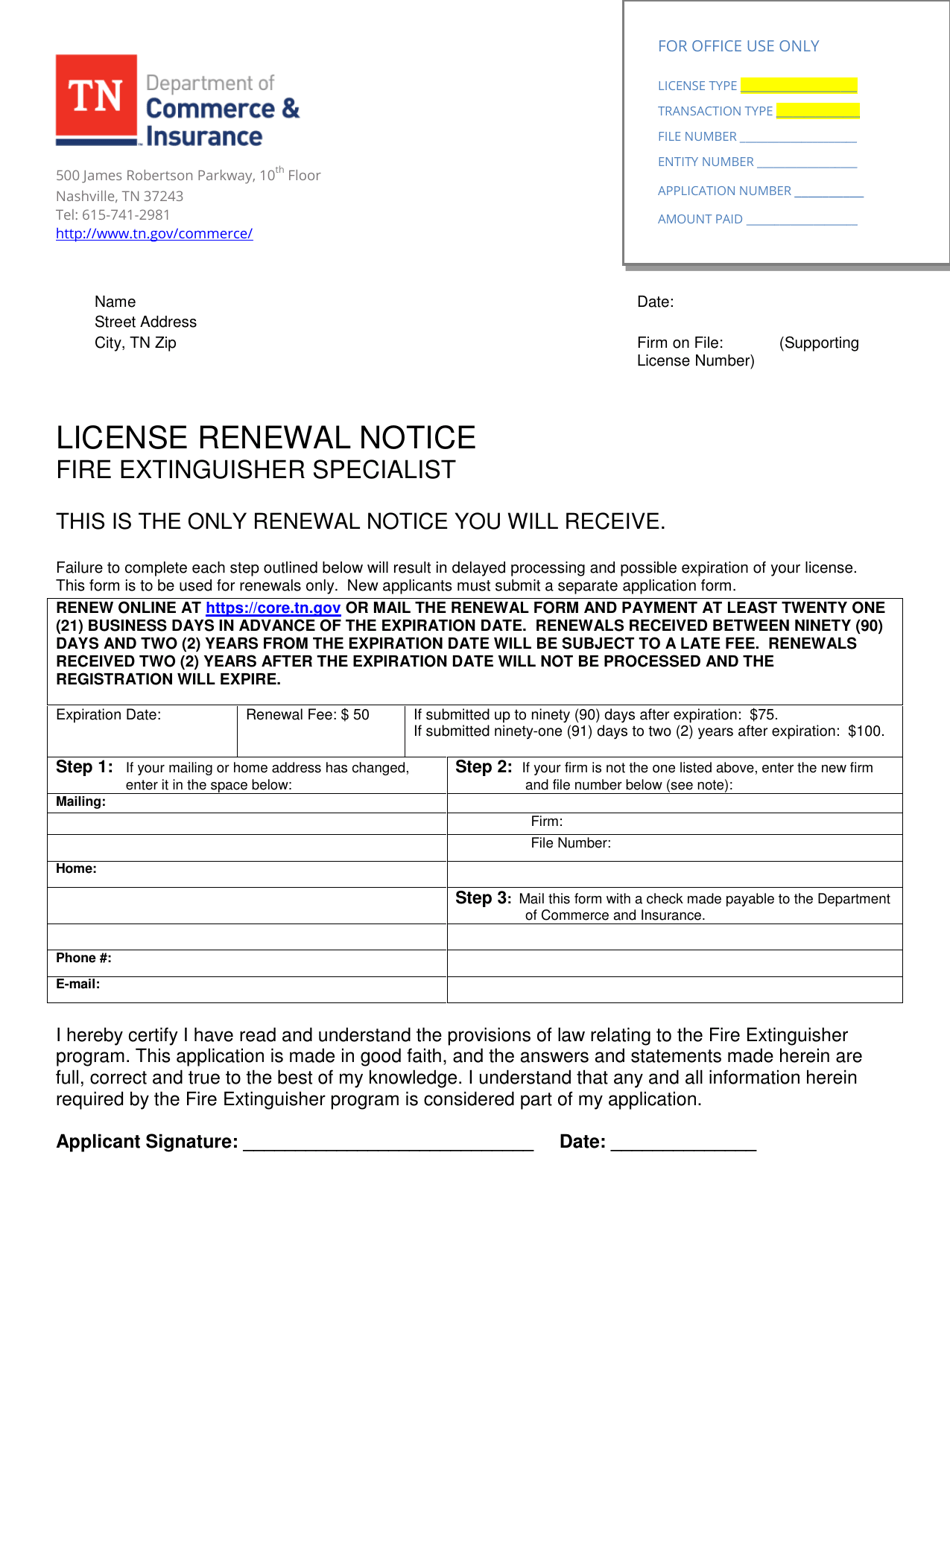 License Renewal Notice - Fire Extinguisher Specialist - Tennessee, Page 1